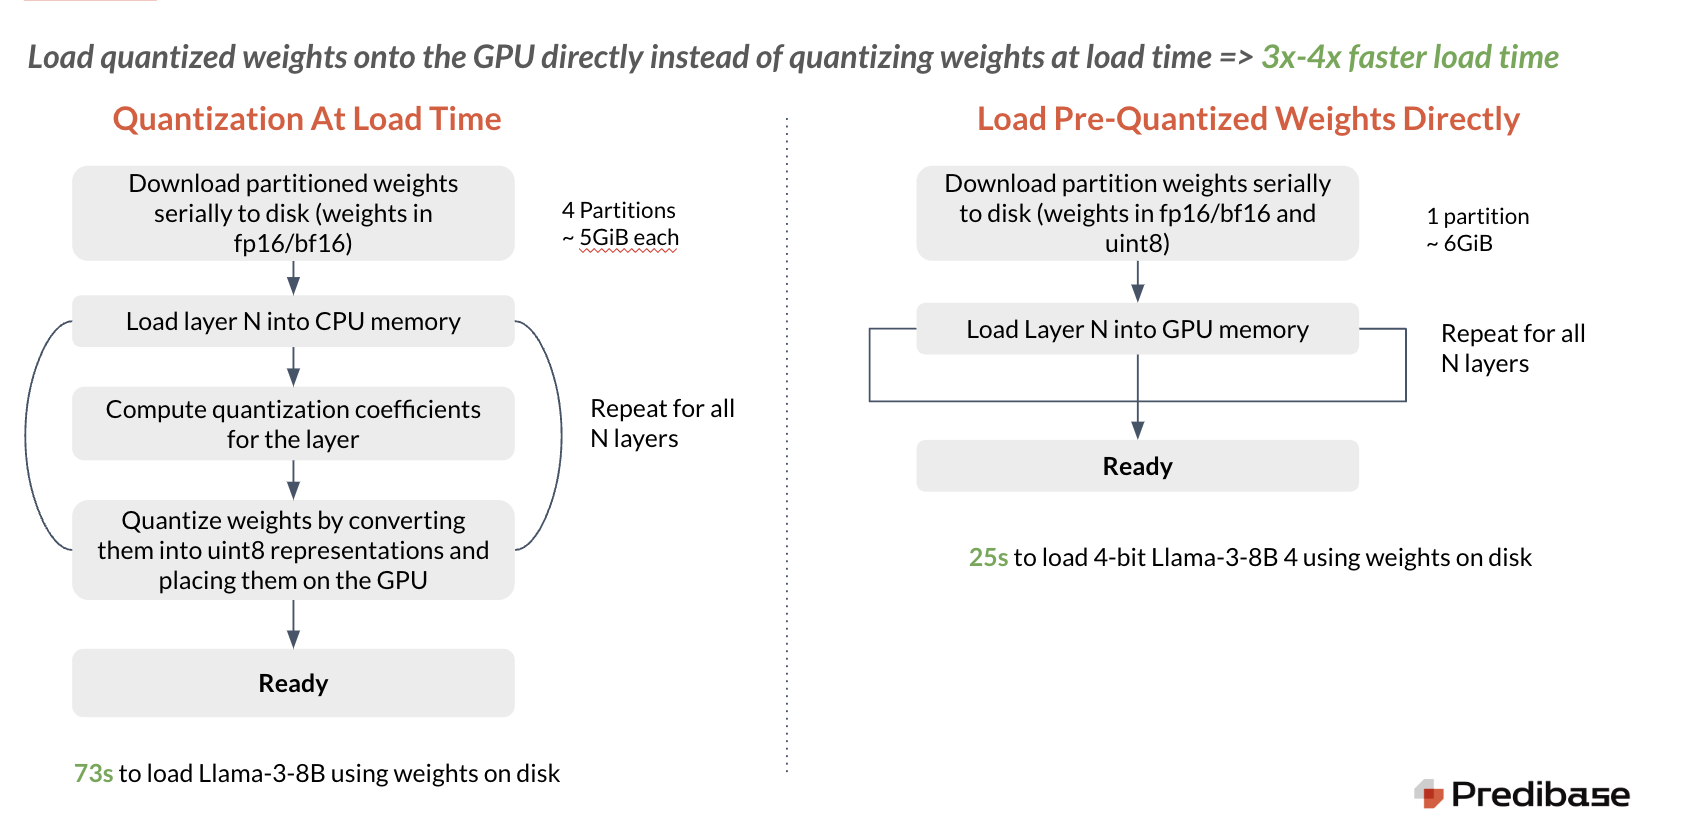 Load quantized weights onto the GPU directly instead of quantizing weights at load time => 3x-4x faster load time